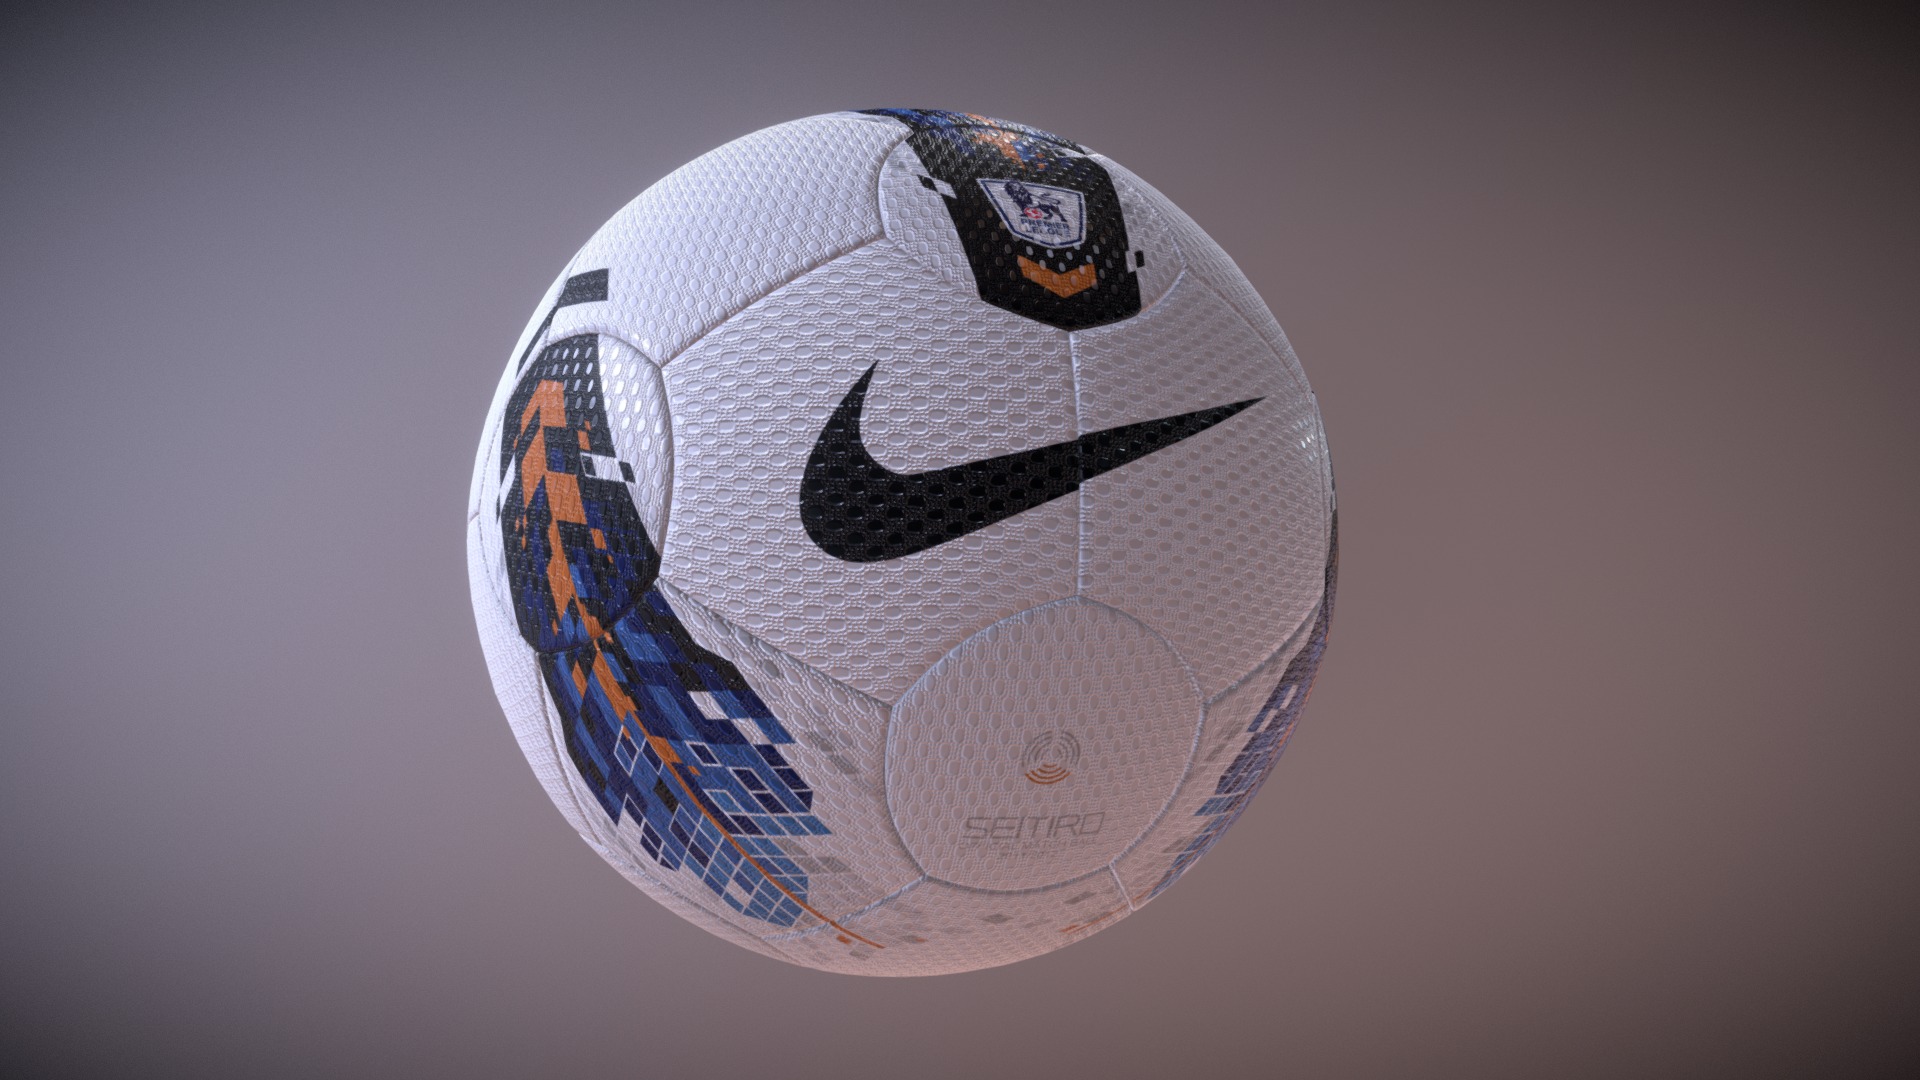 3D model Nike Seitiro Ball - This is a 3D model of the Nike Seitiro Ball. The 3D model is about a white and blue circular object.